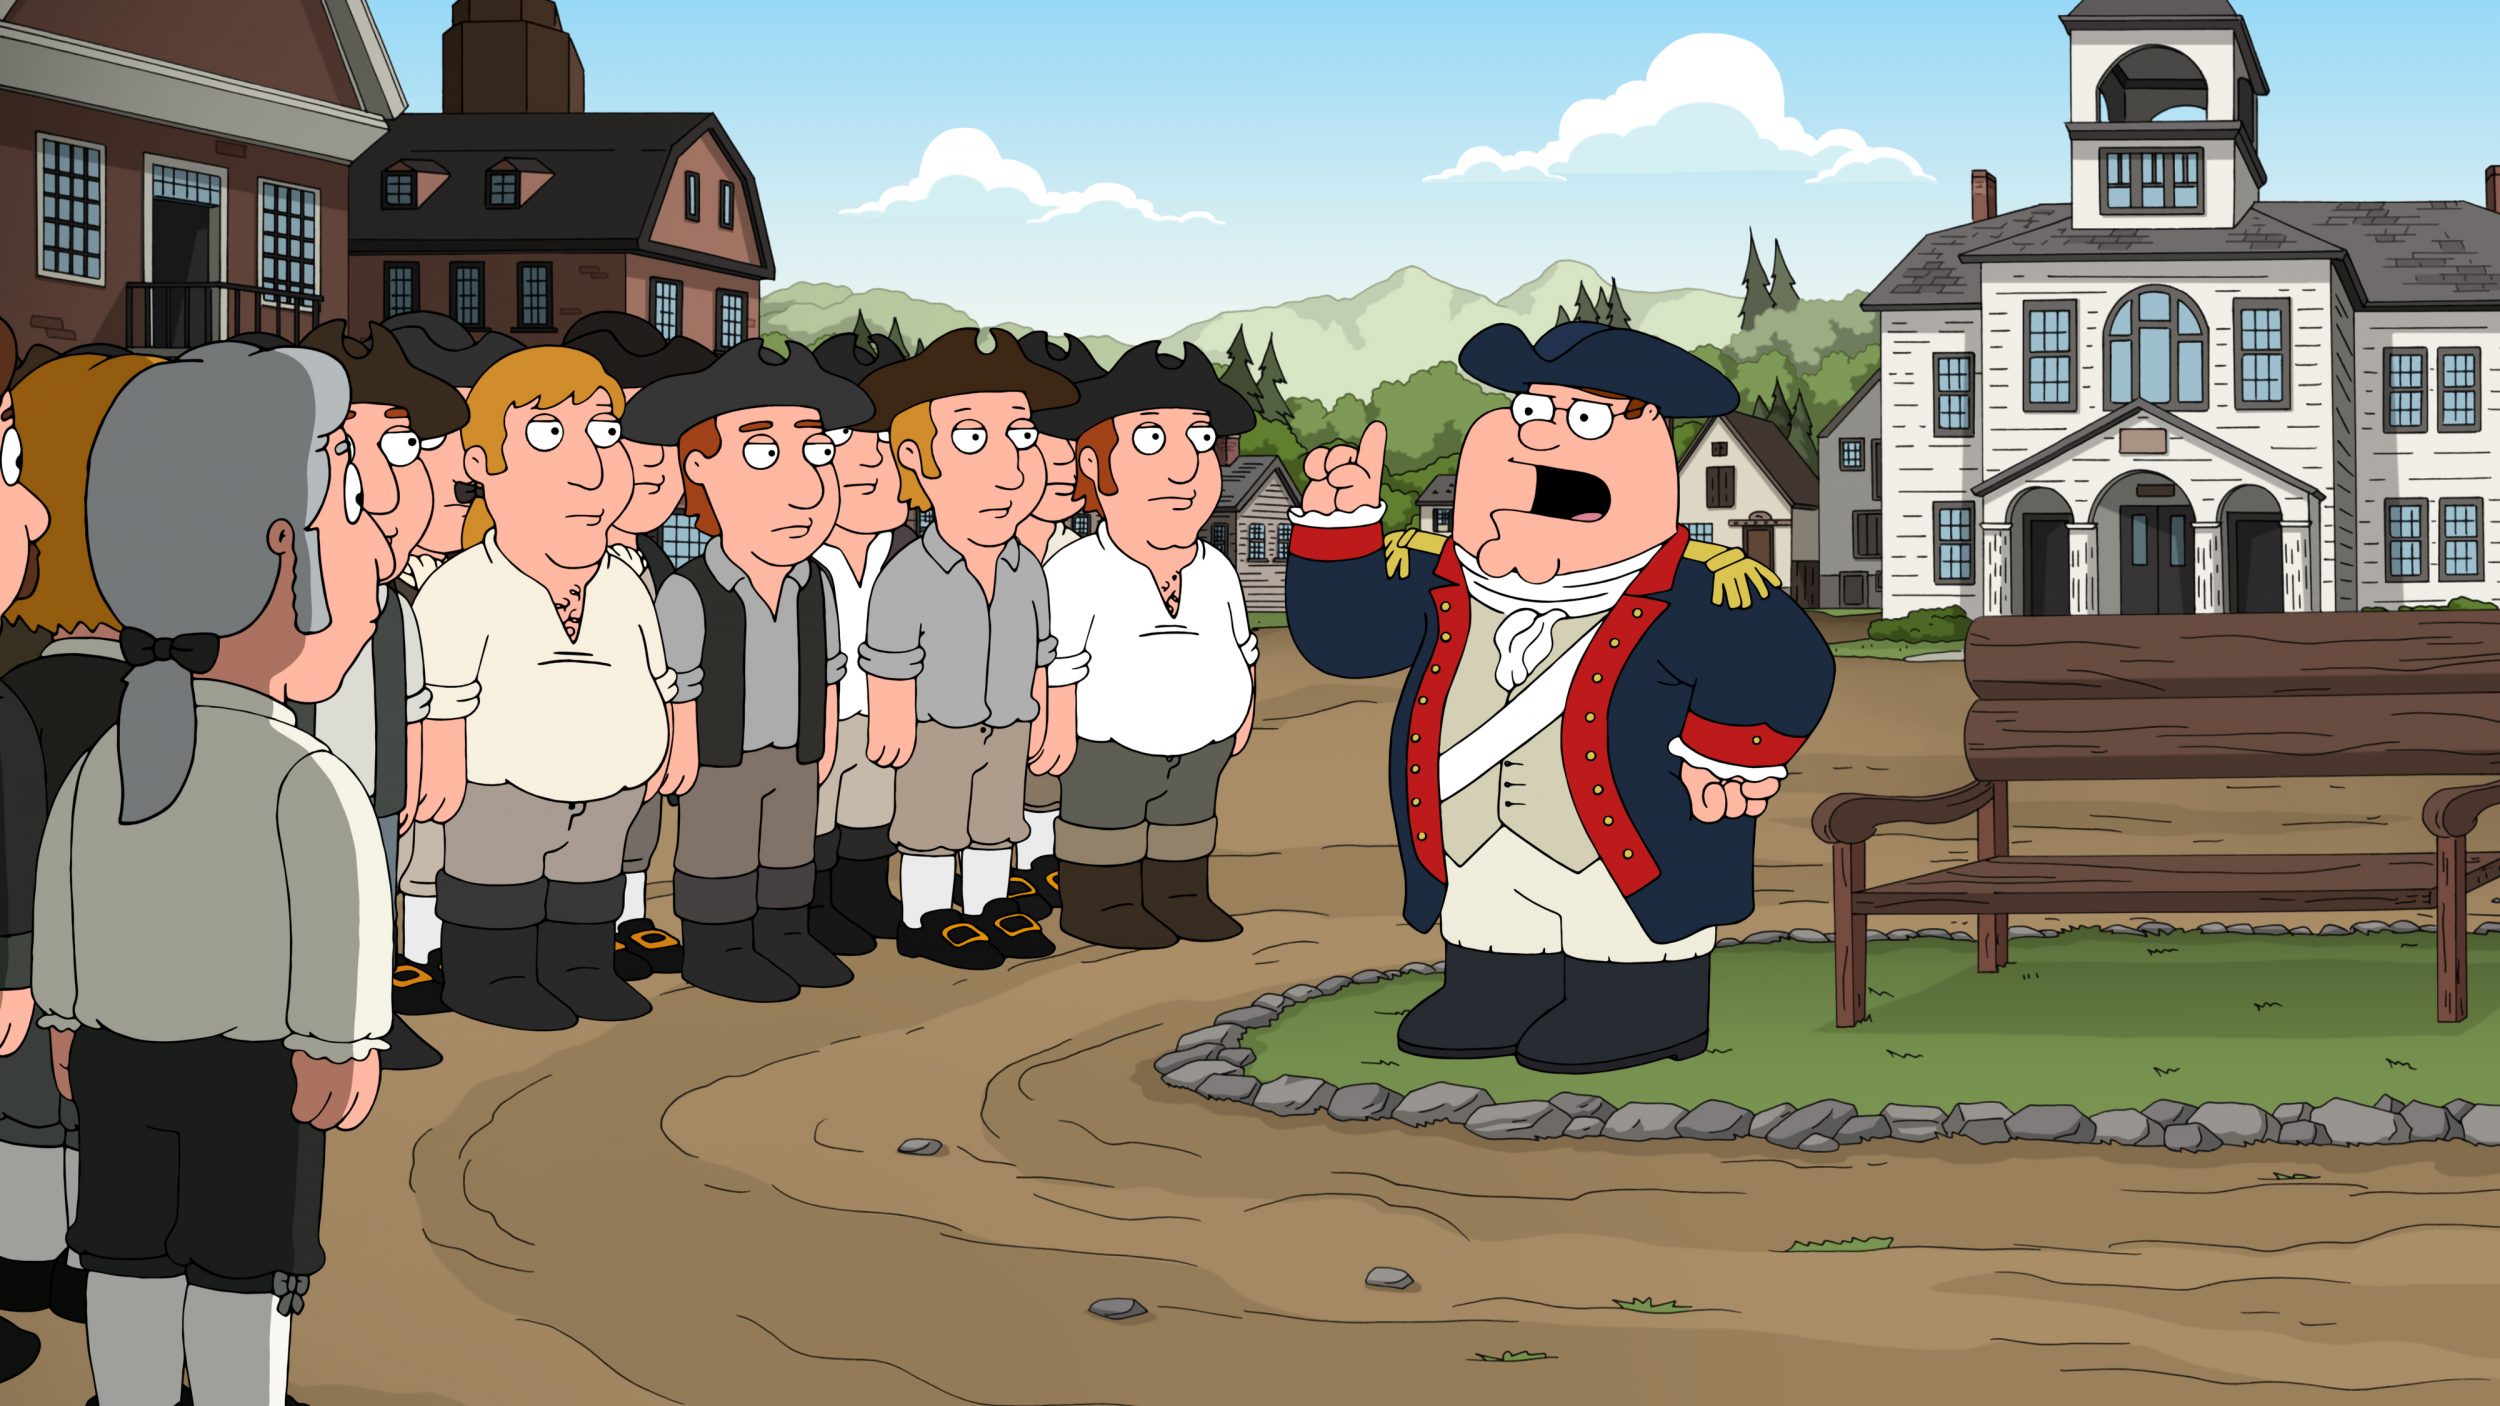 FAMILY GUY: Rob Gronkowski, of the New England Patriots, moves into the house behind the Griffins in the ÒGronkowsbeesÓ episode of FAMILY GUY airing Sunday, Jan. 15 (9:30-10:00 PM ET/PT) on FOX. FAMILY GUY ª and © 2016 TCFFC ALL RIGHTS RESERVED. CR: FOX